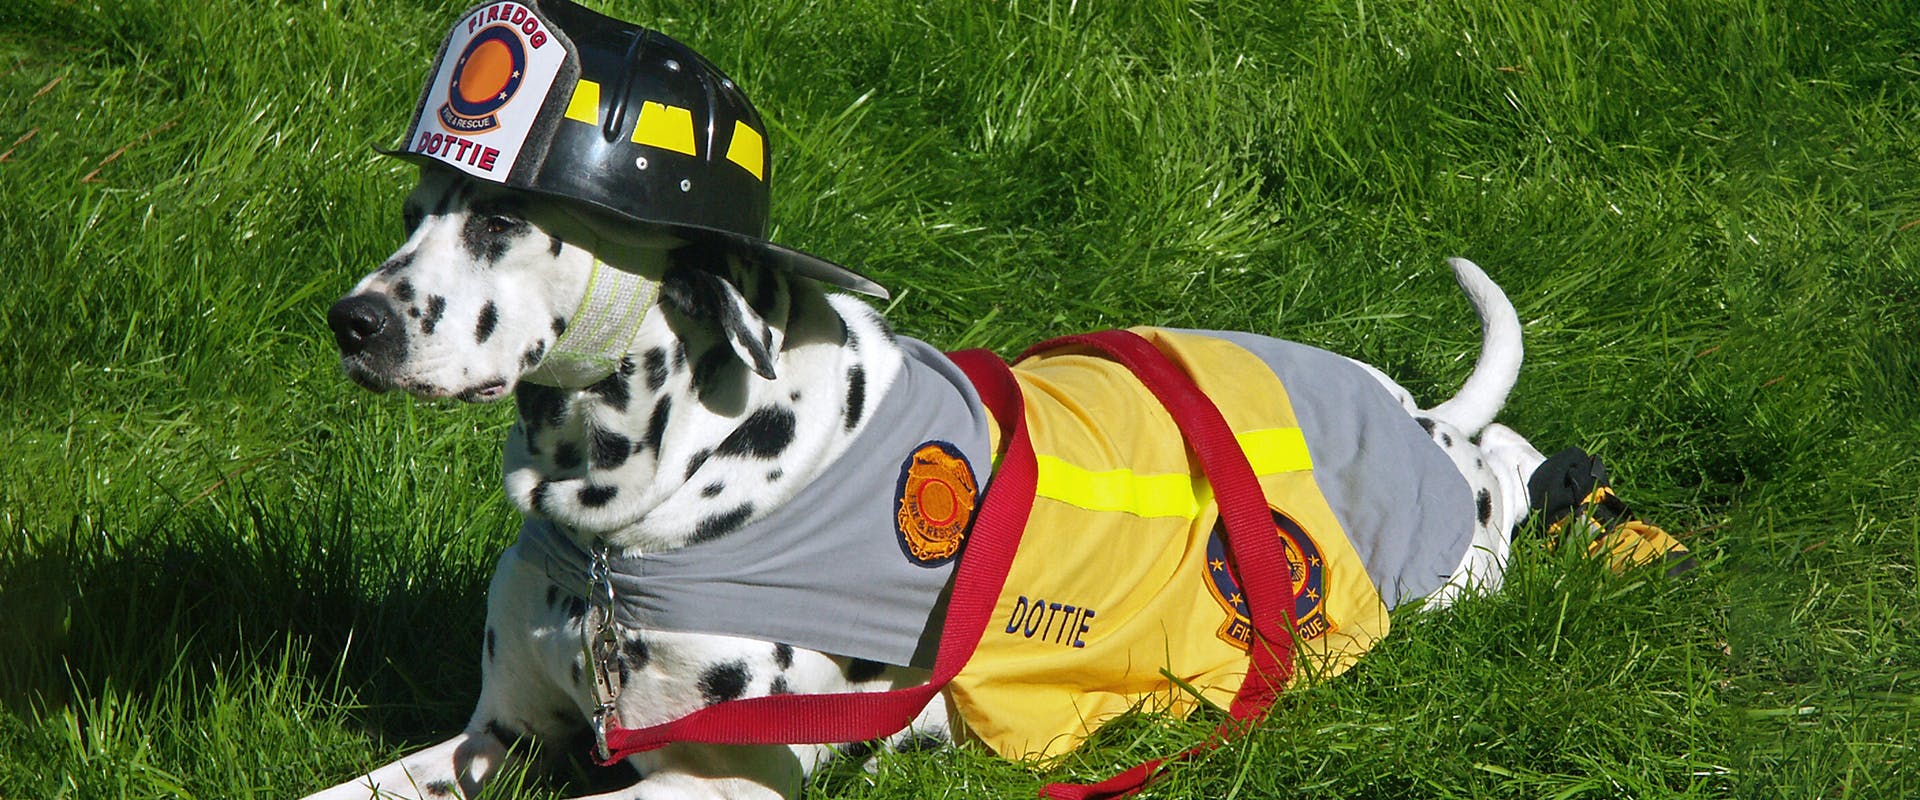 A Dalmatian fire dog, wearing a firefighter's hard hat and a hi-vis jacket